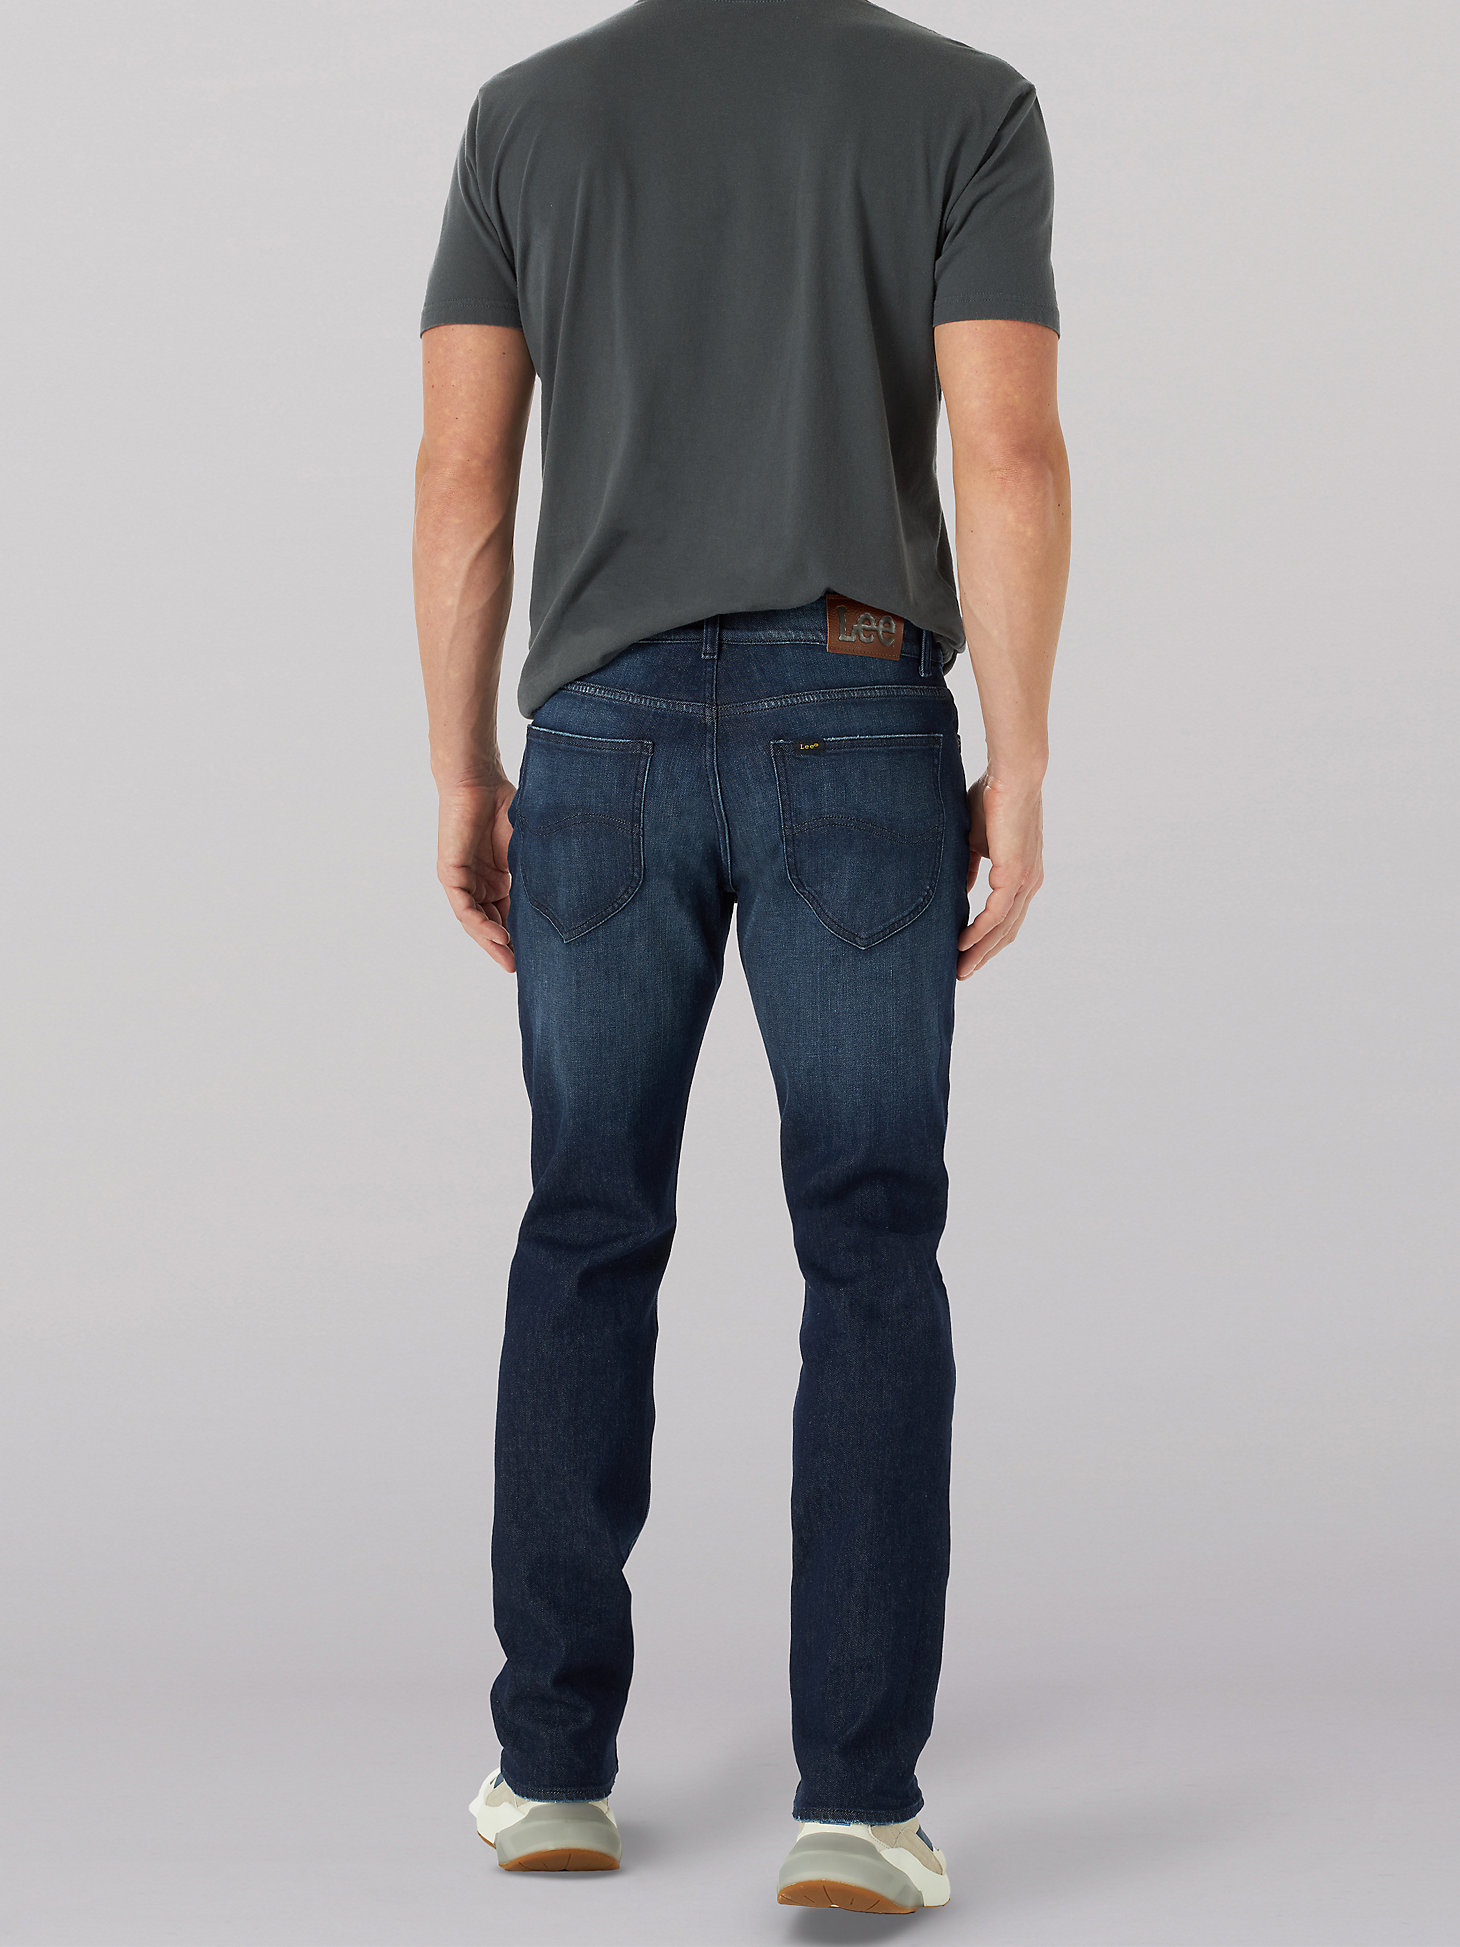 Men's Extreme Motion 4-Way Stretch Straight Tapered Jean in Counter Punch alternative view 1